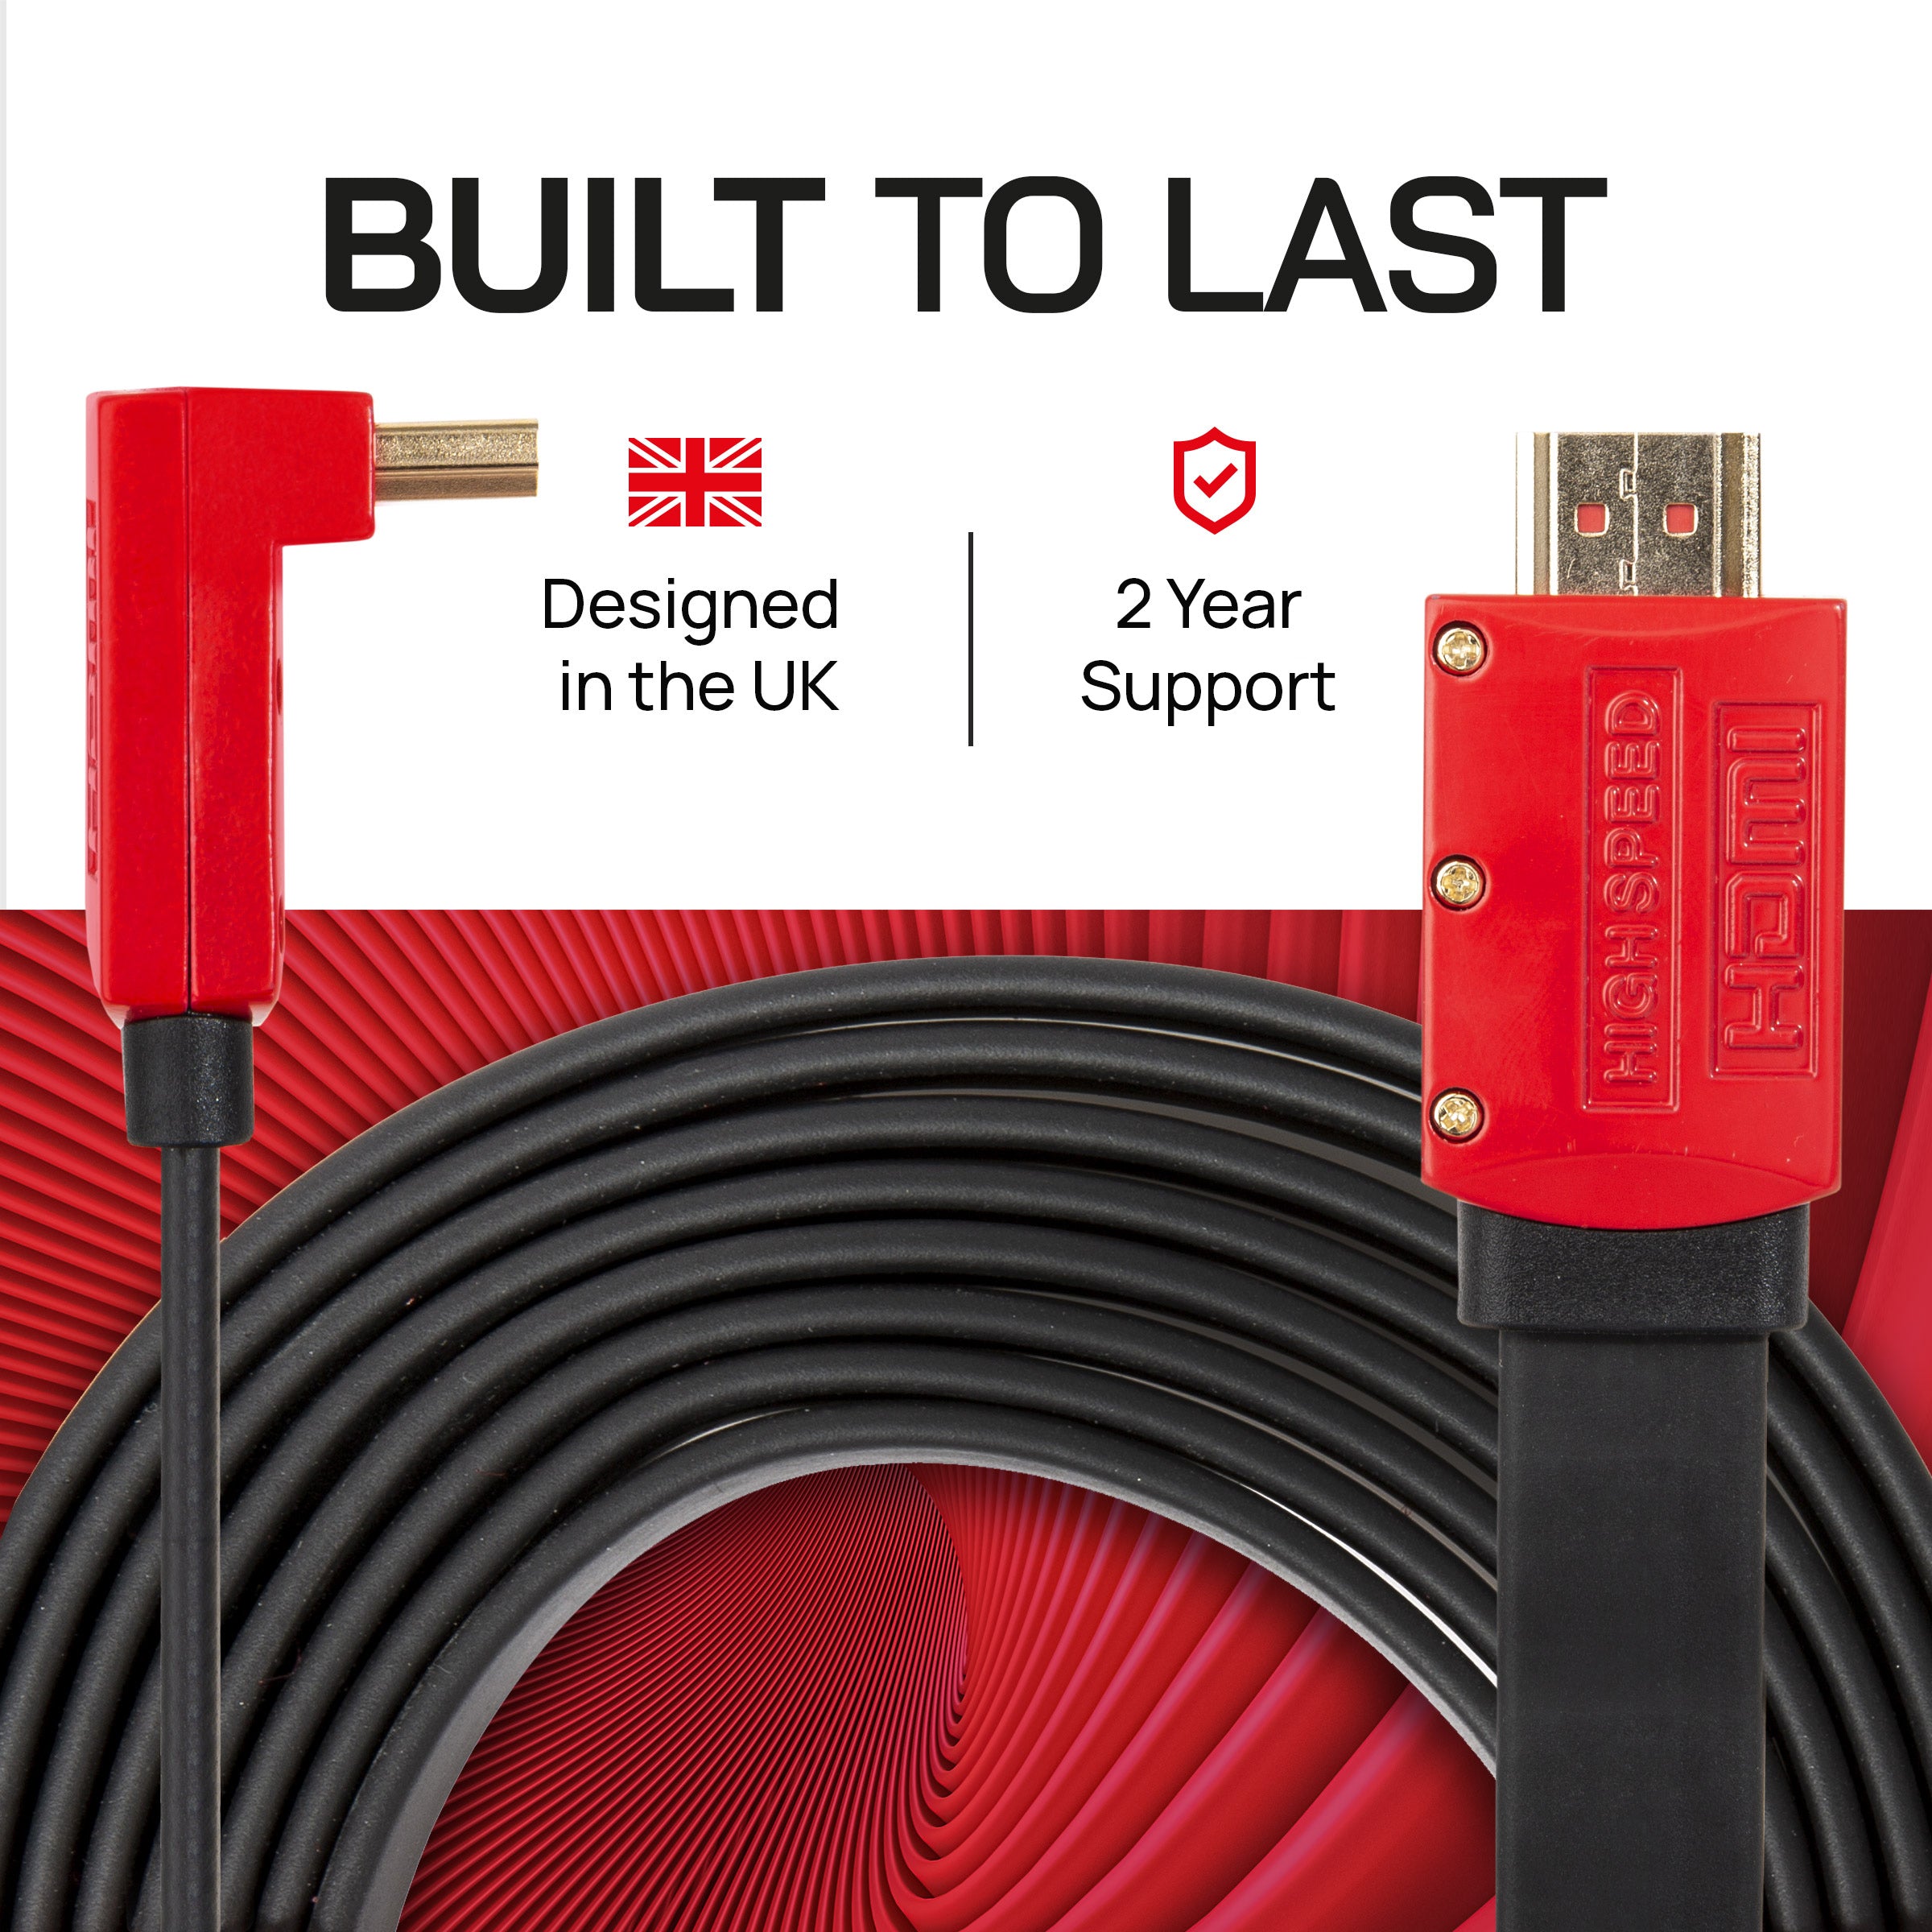 Flat HDMI v2.0 4k 60fps Ultra HD High Speed Cable HDR Graphics, Straight to Angled Connectors